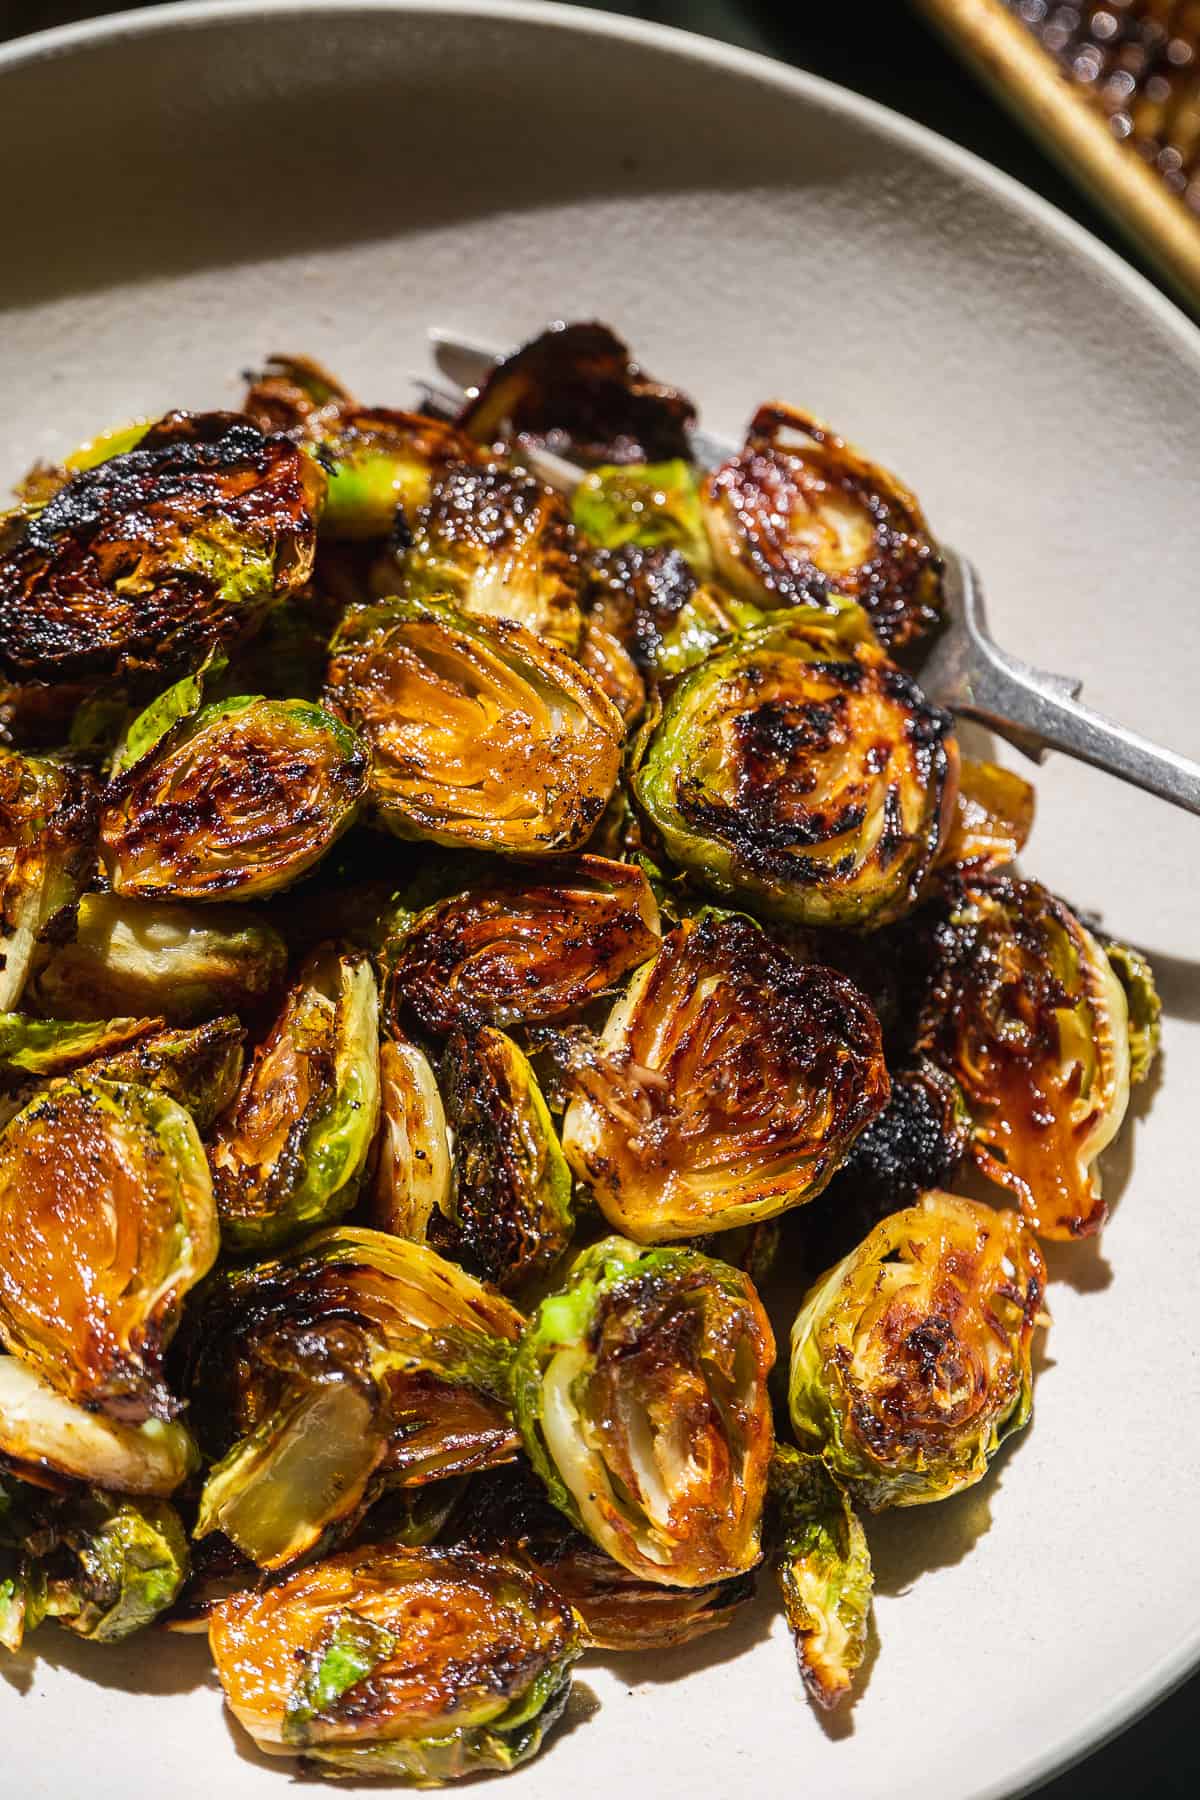 Caramelized brussel sprouts in a gray bowl.